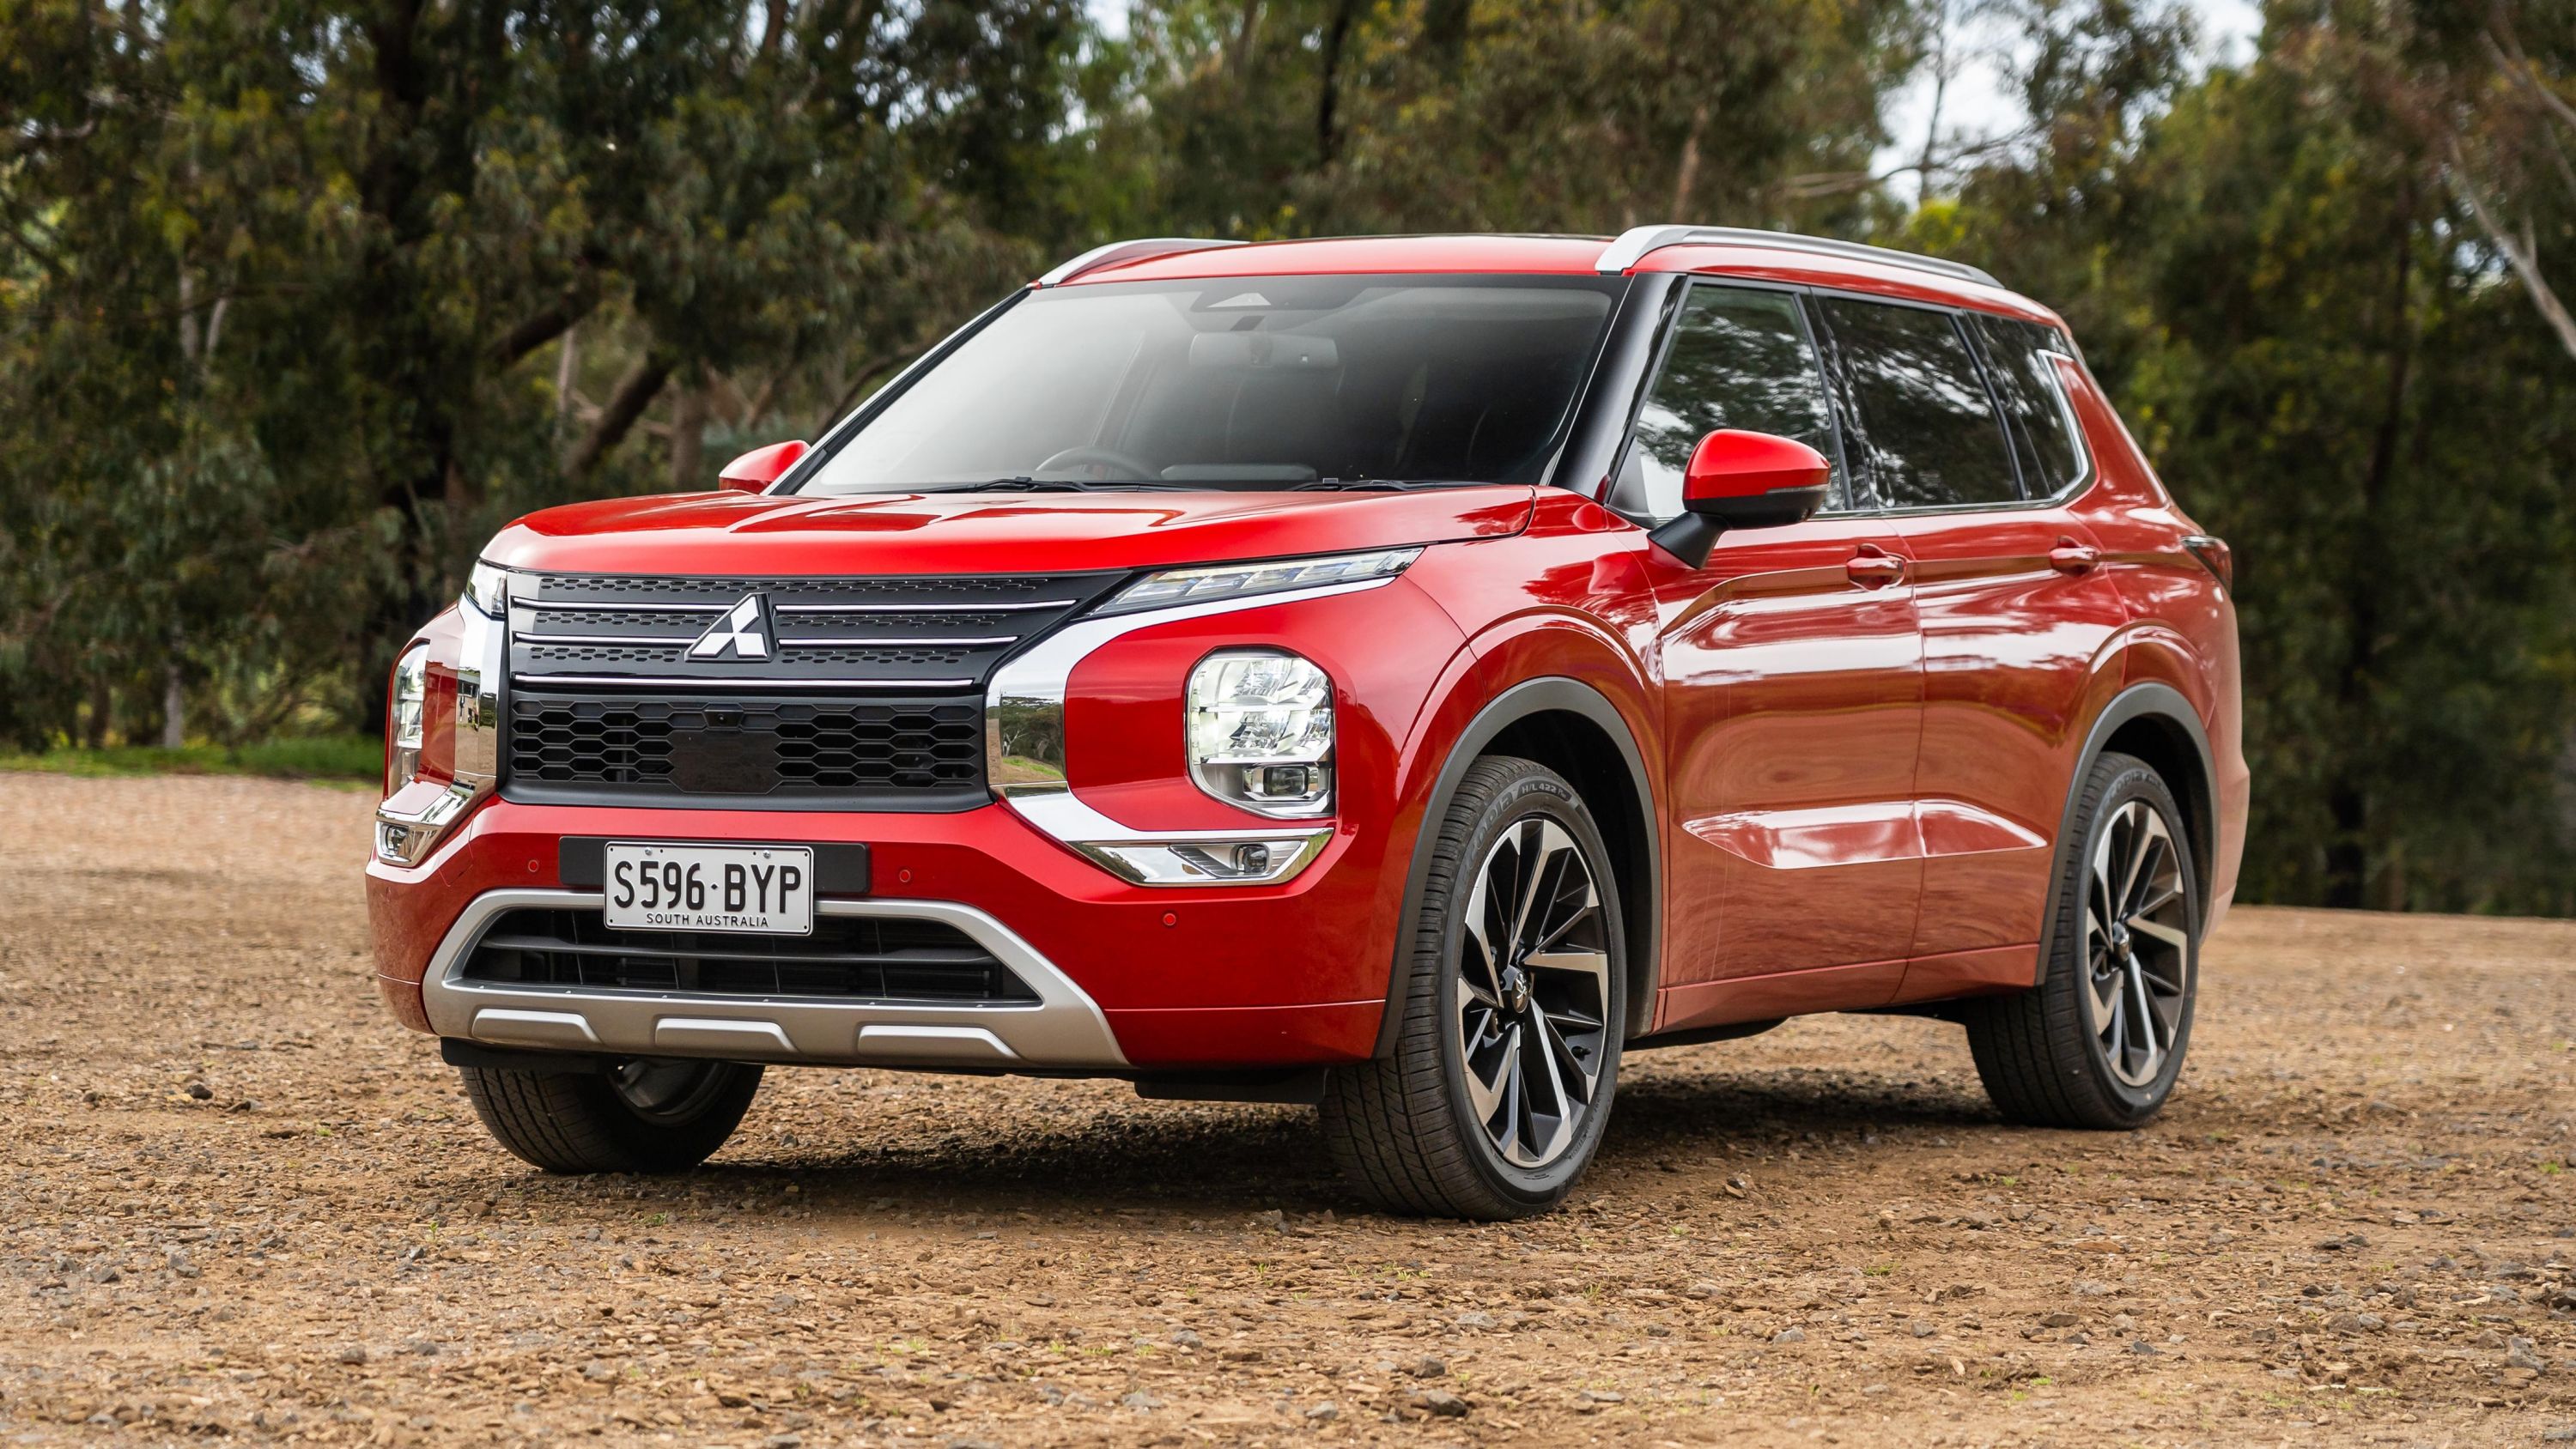 REVIEW: All-New 2022 Mitsubishi Outlander SEL Is A Game Changer